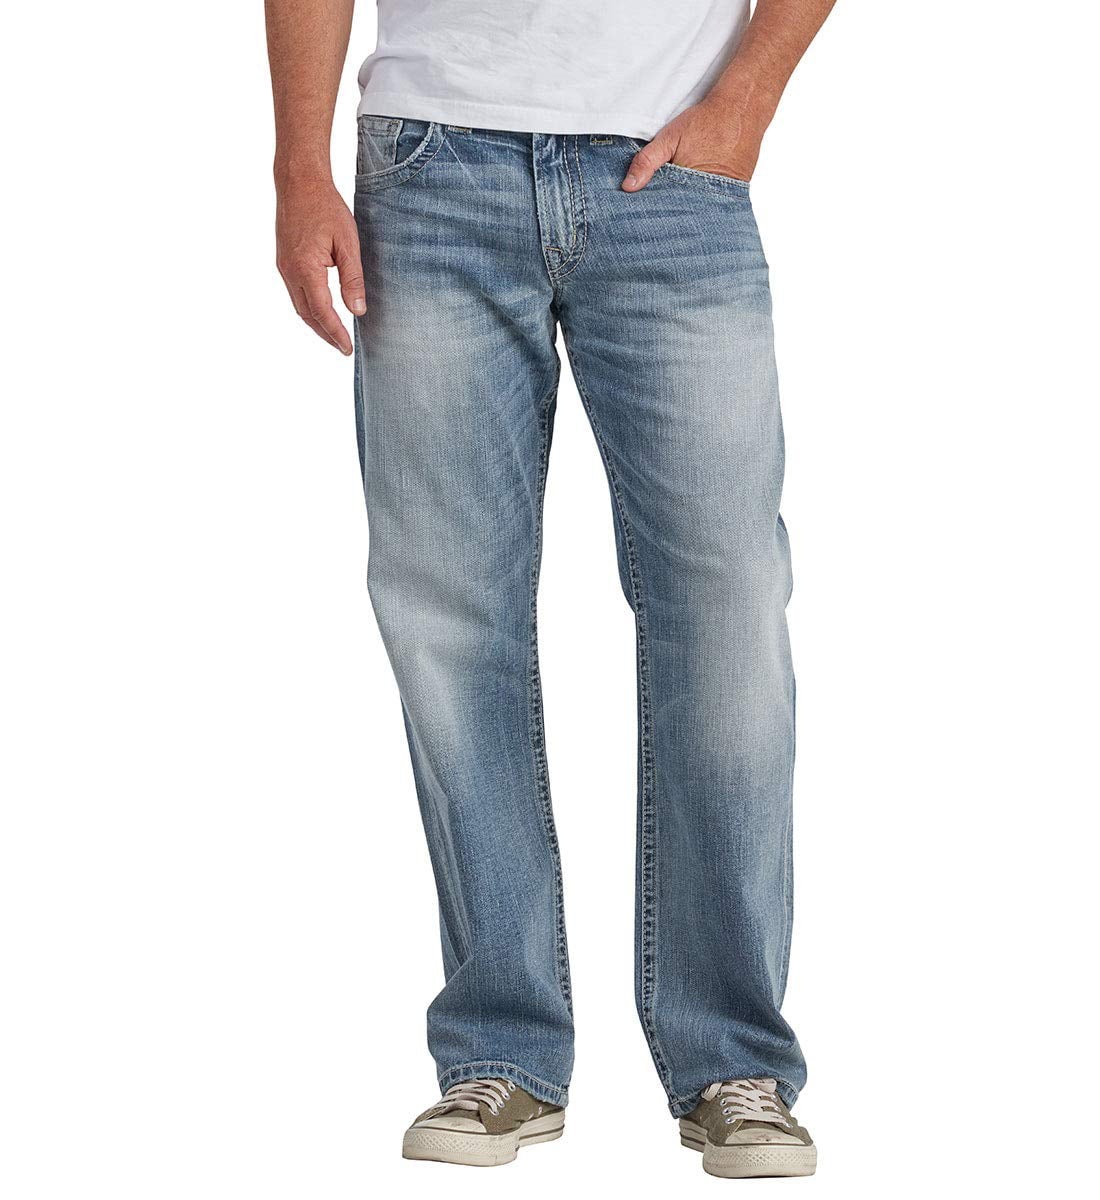 Silver Jeans Co Jeans - Mens Jeans 33x30 Classic Straight Leg Stretch ...